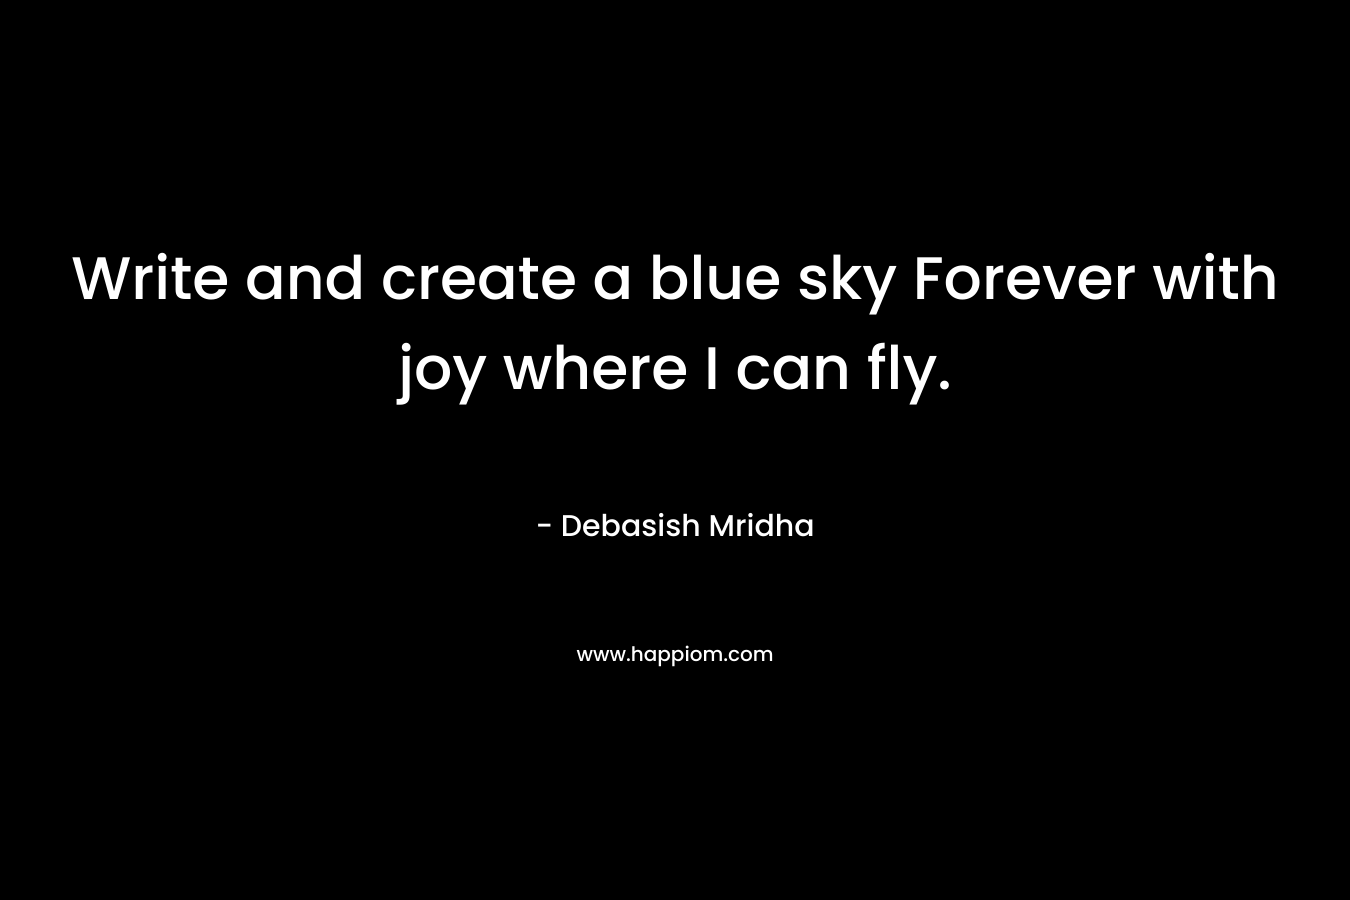 Write and create a blue sky Forever with joy where I can fly.